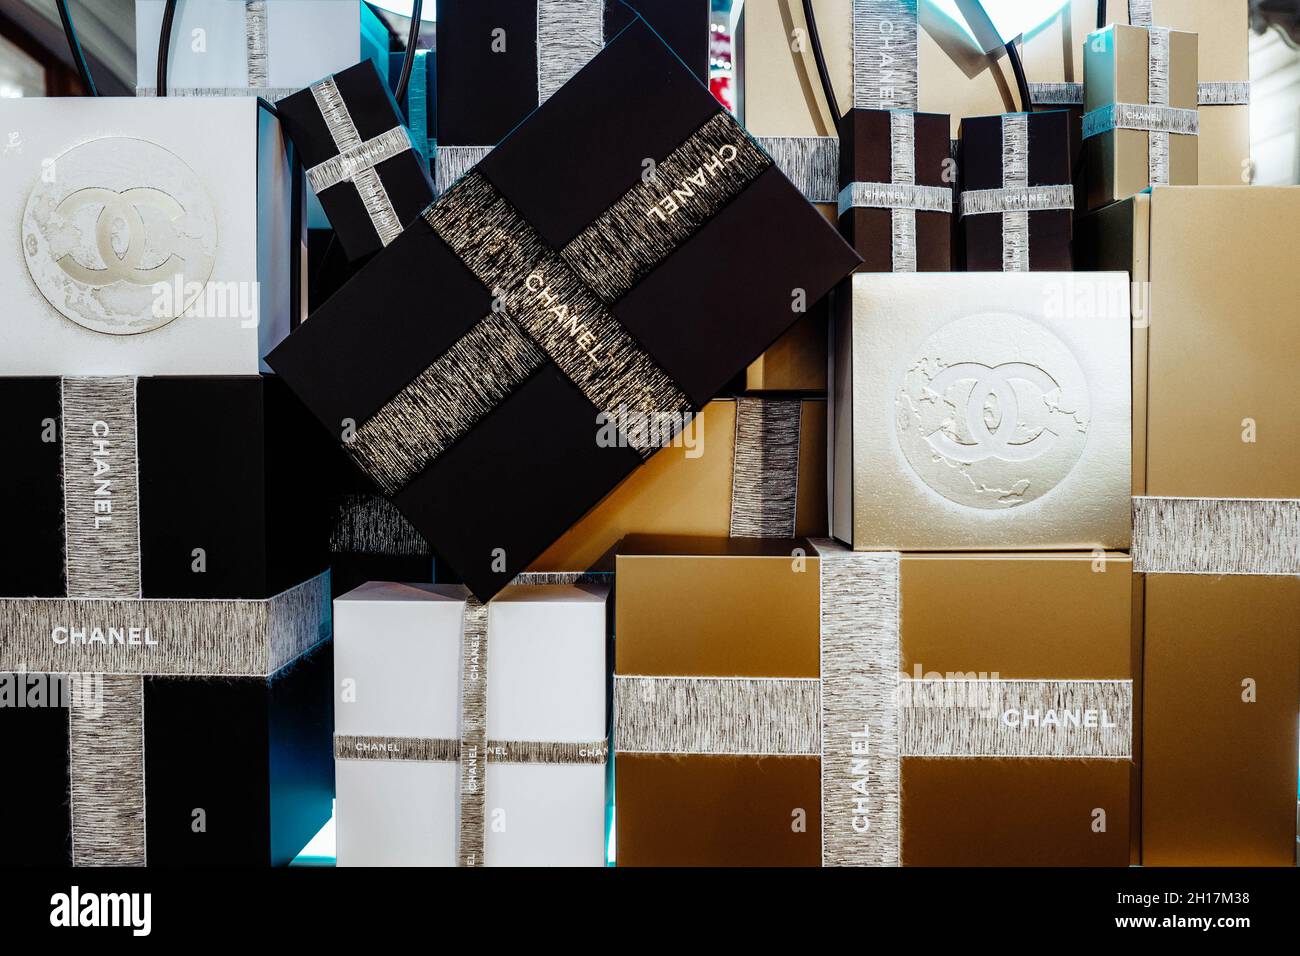 Chanel Gold and Black Christmas Gift Boxes with ribbons. New Year's